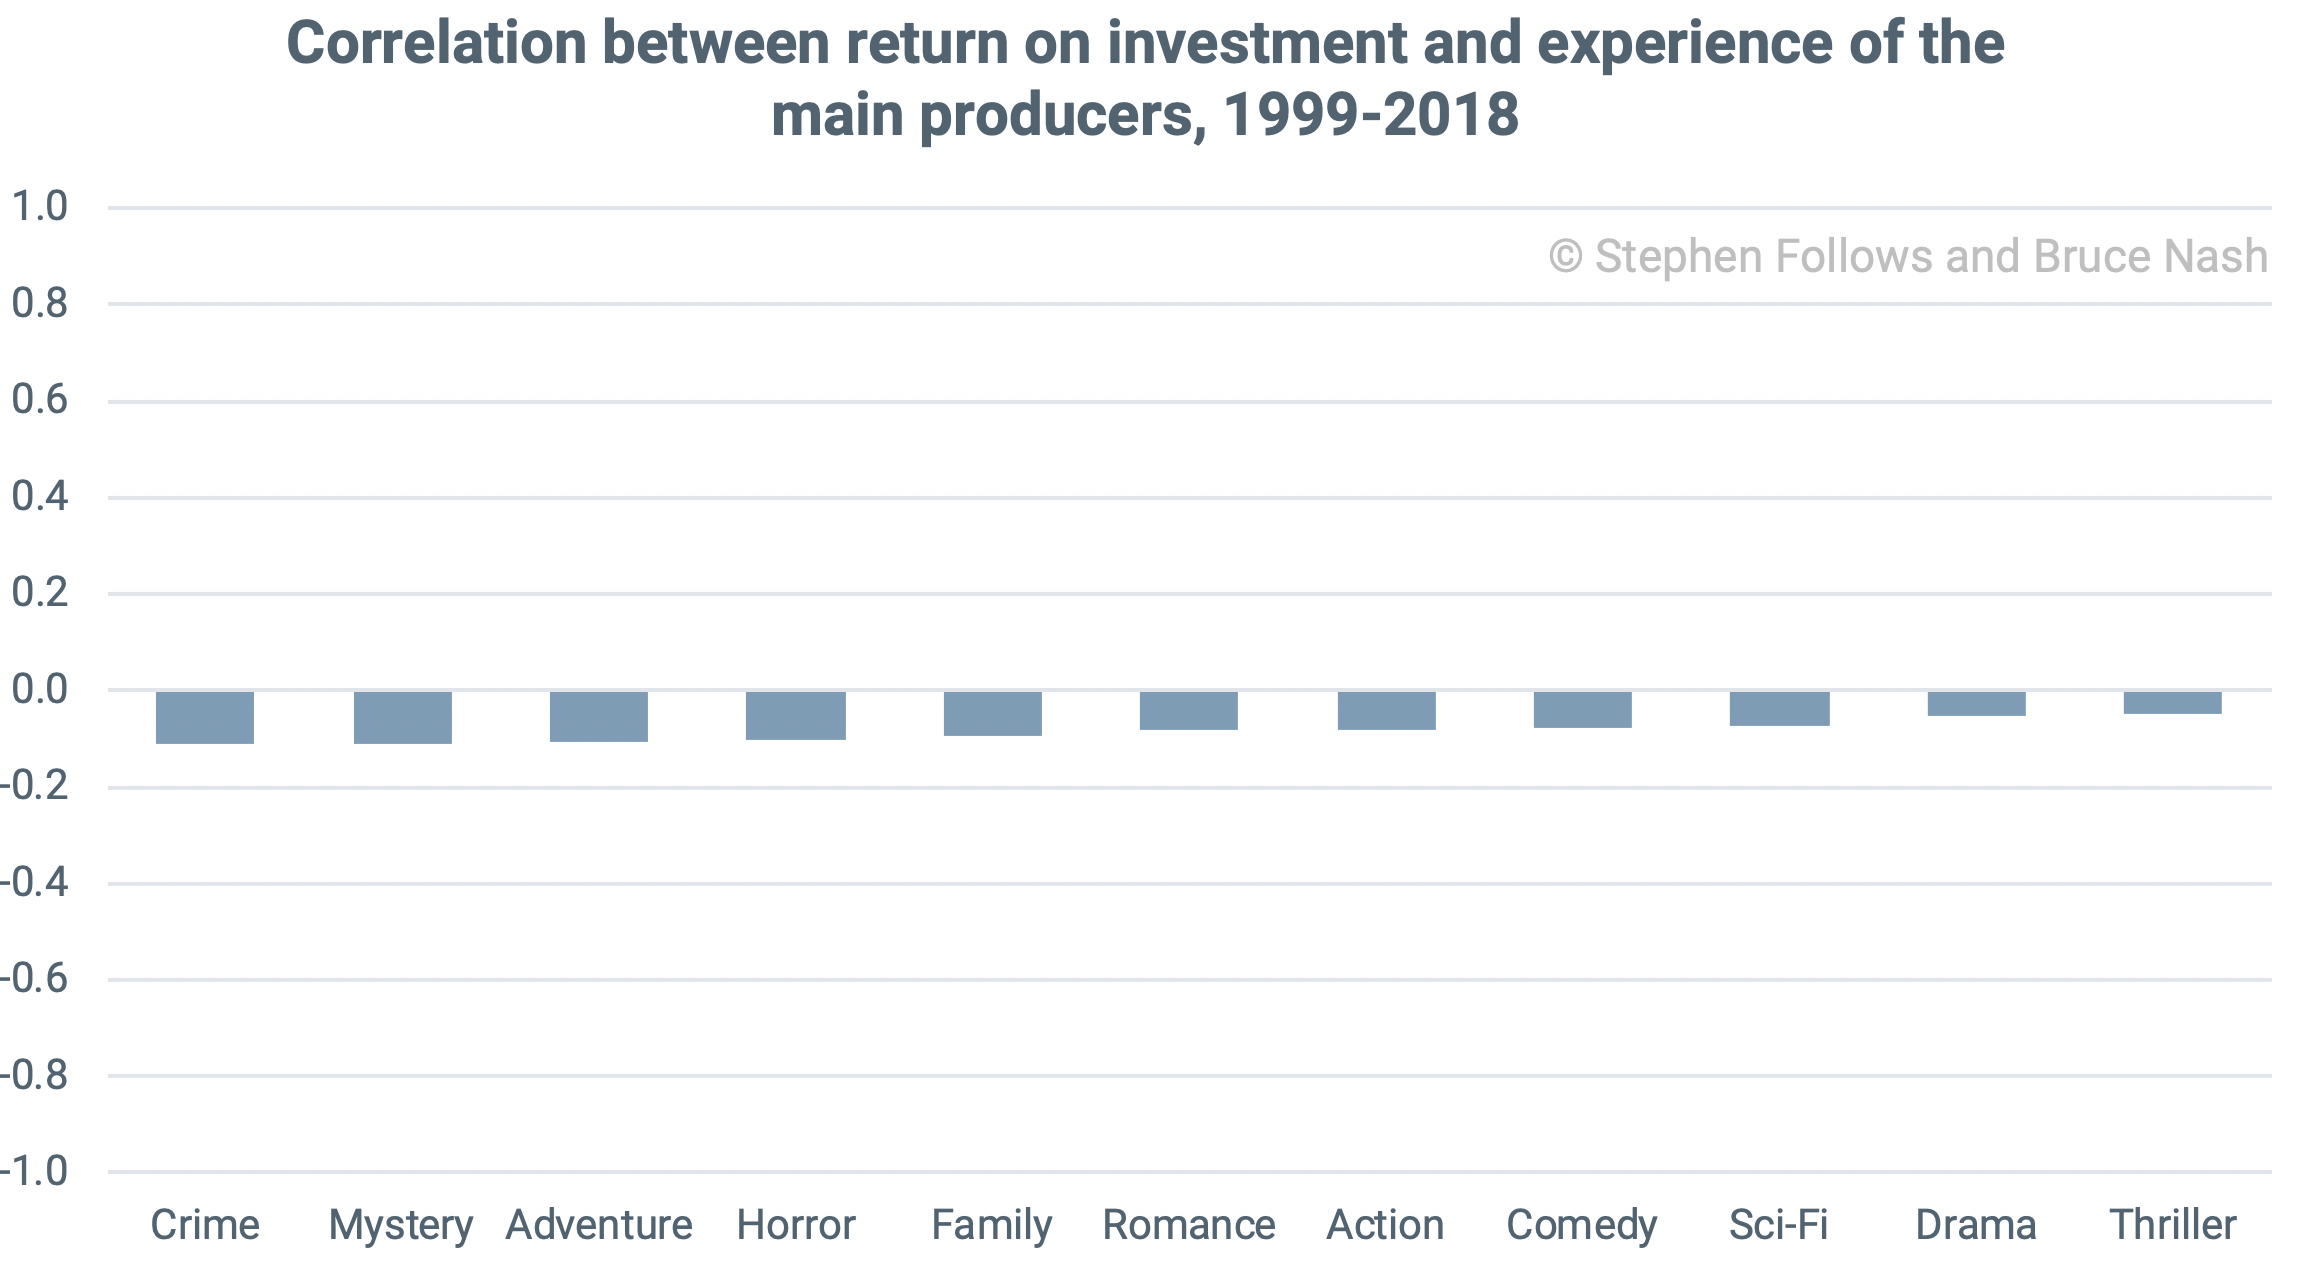 Correlation between return on investment and experience of the main producers, 1999-2018